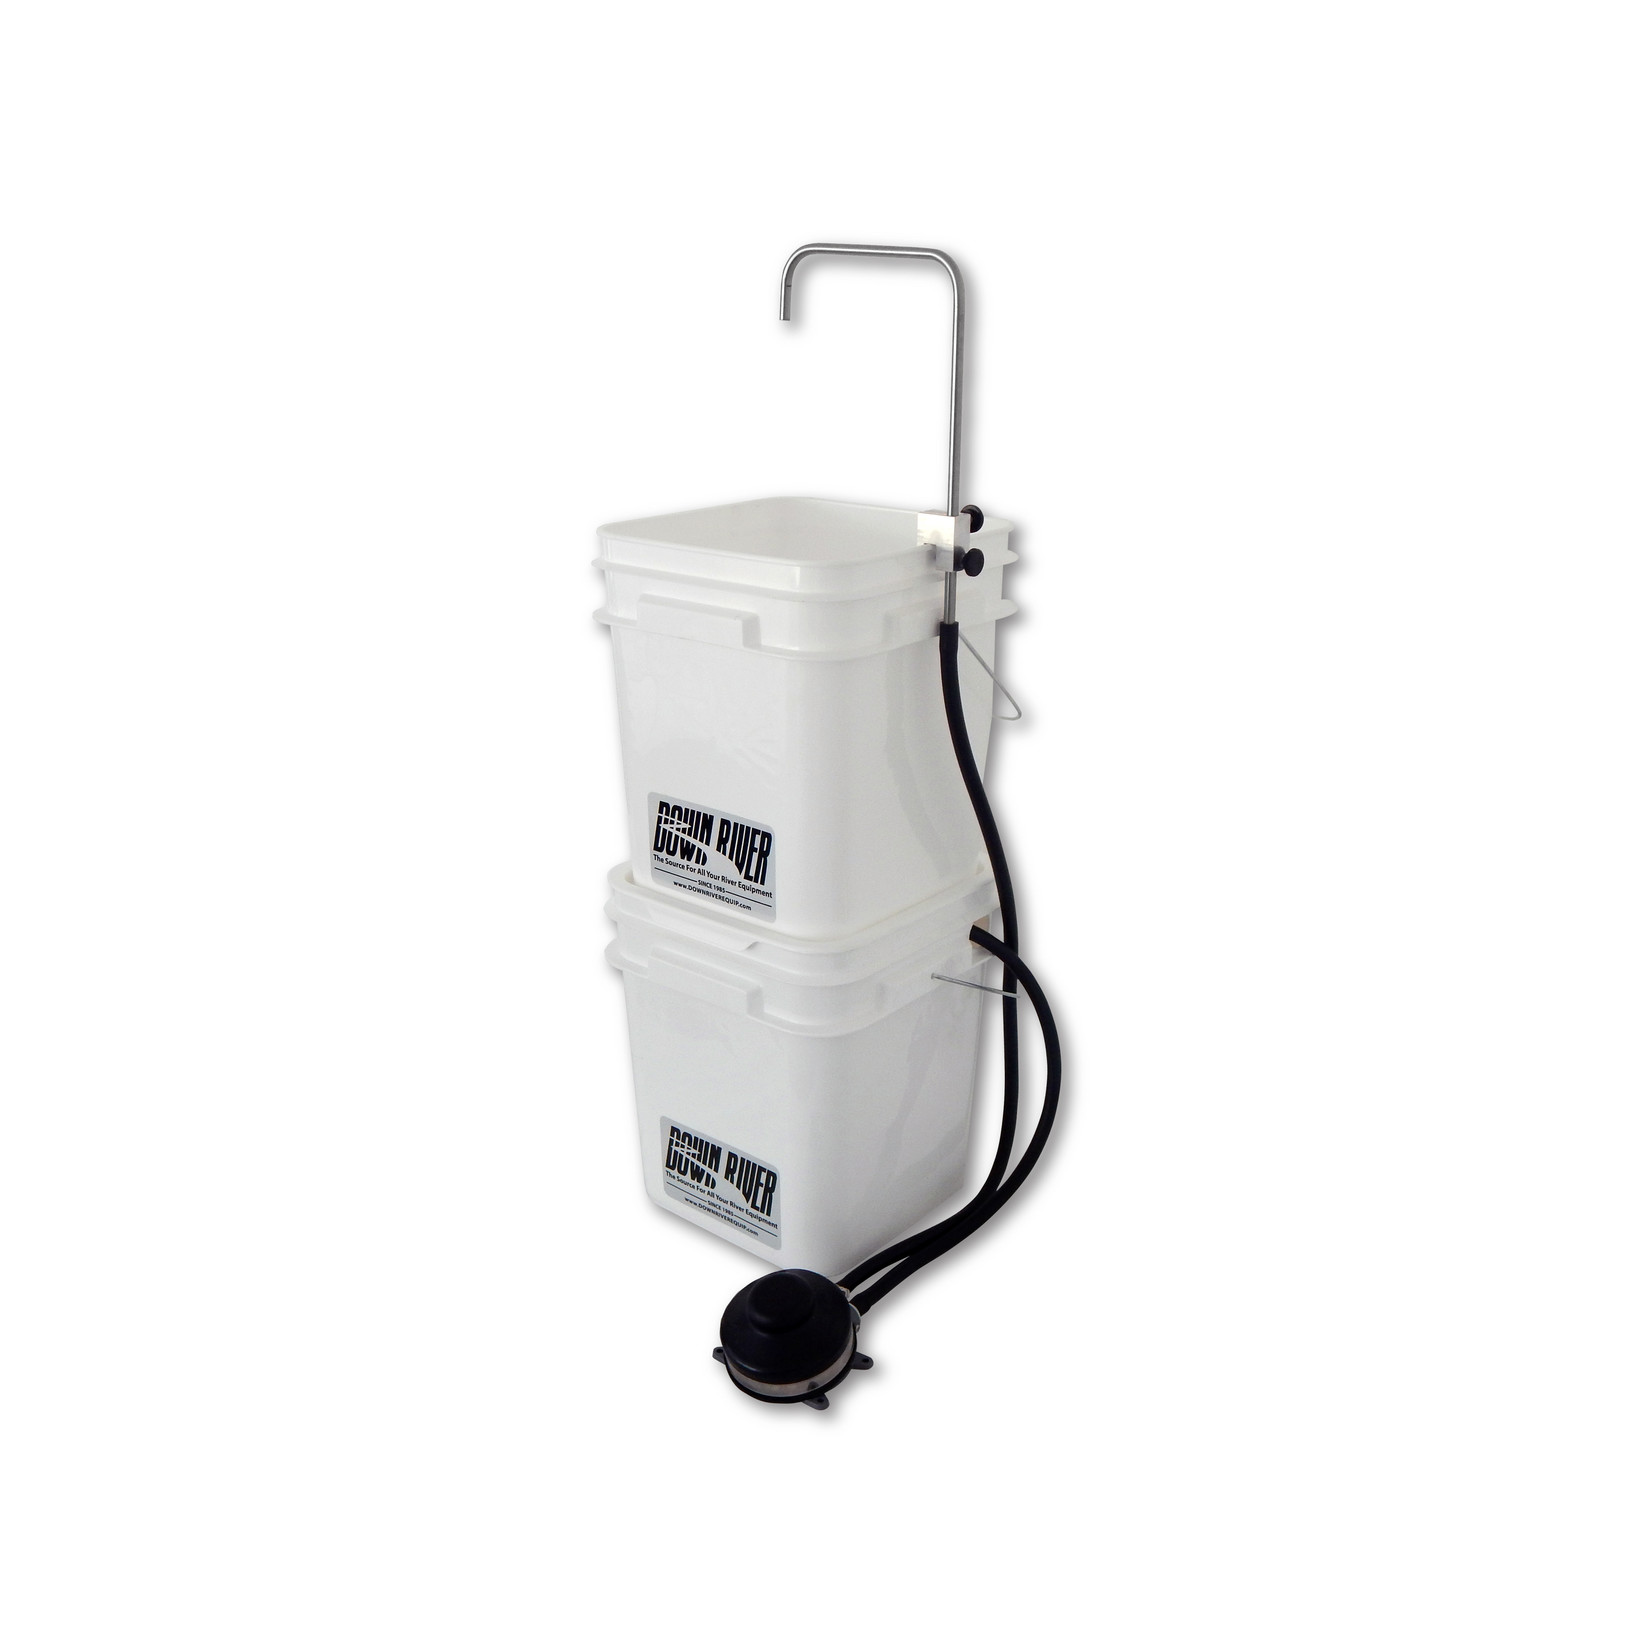 NRS NRS Inflatable Boat Cleaner, 1 gallon Repair at Down River Equipment